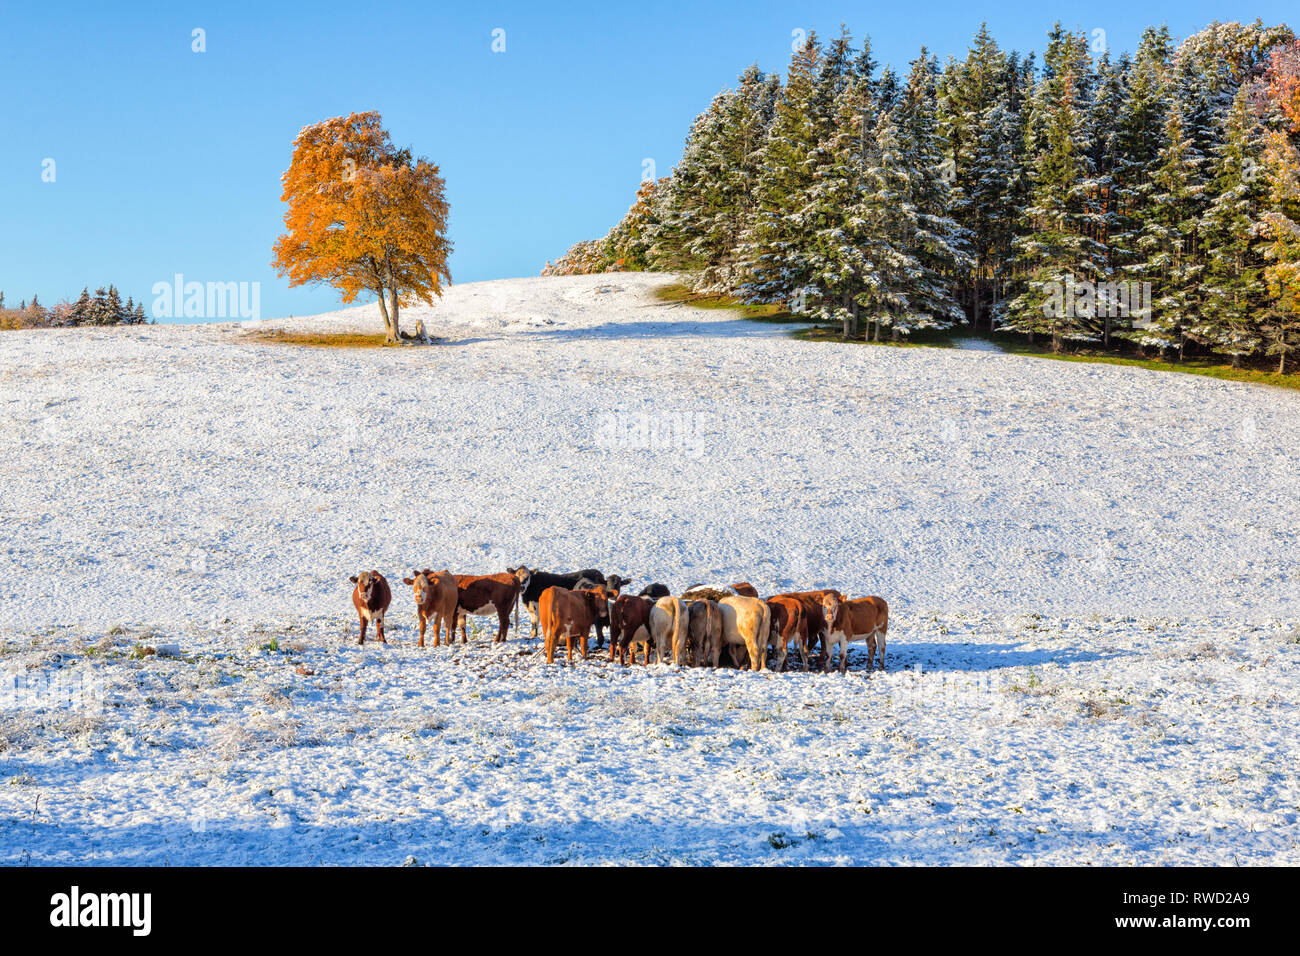 Lone tree and cattle, snow covered ground, St. Catherines, Prince Edward Island, Canada Stock Photo